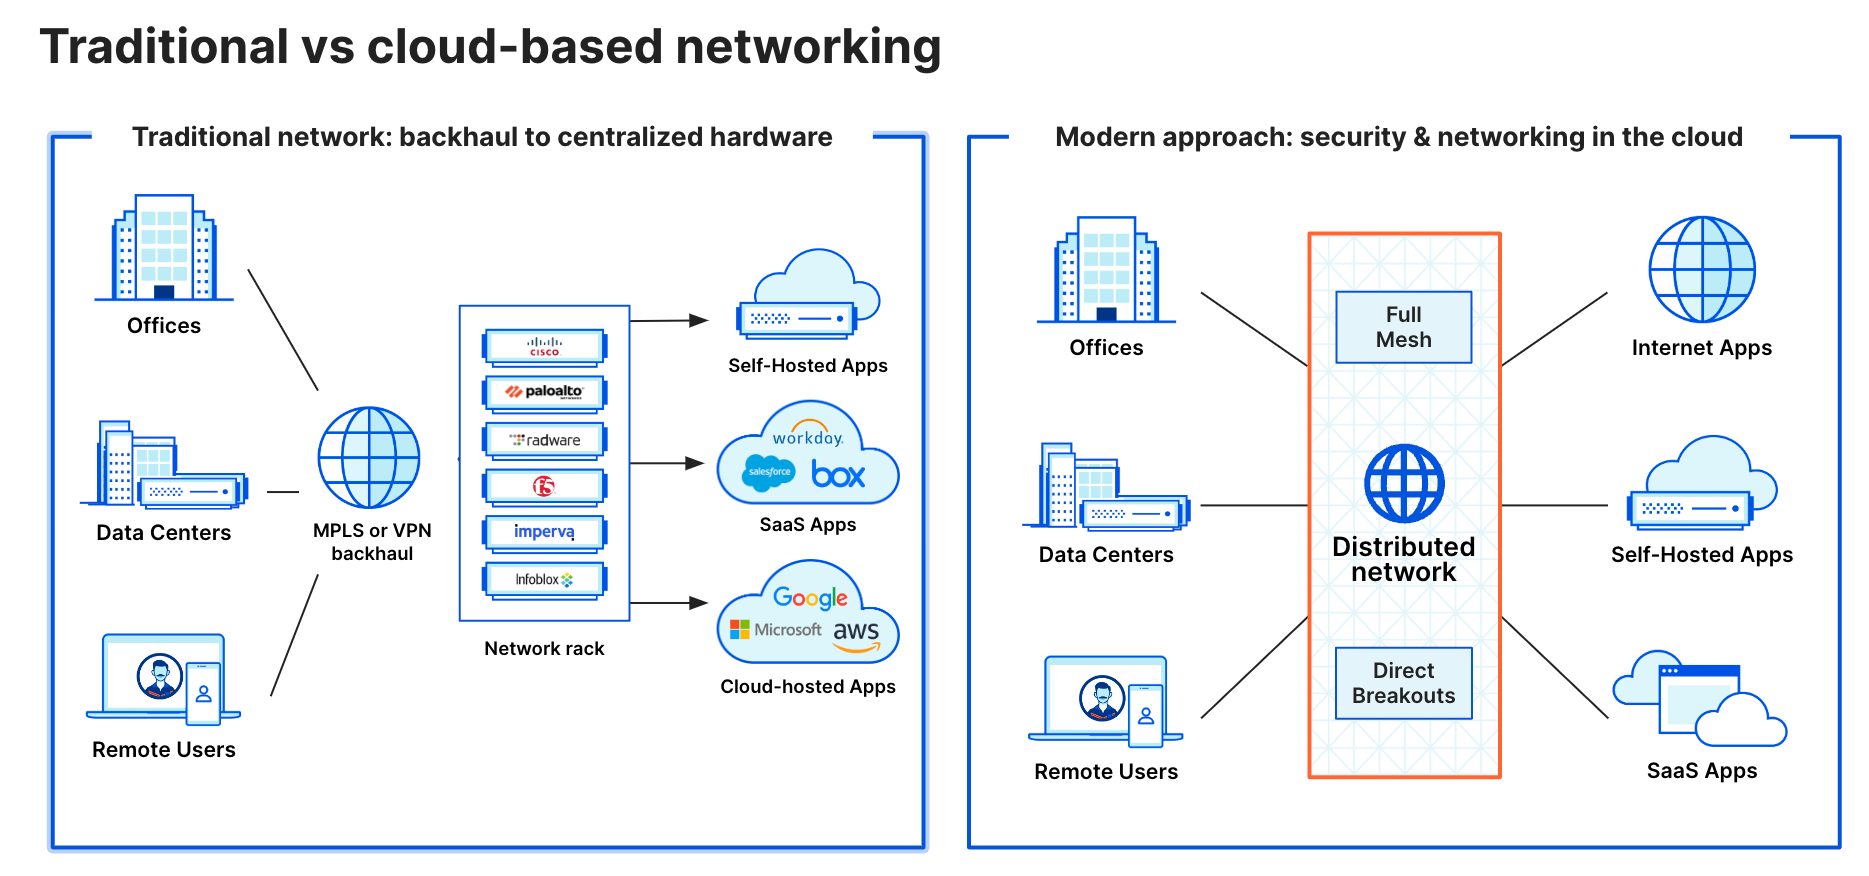 Traditional vs. cloud-based networking and security architecture